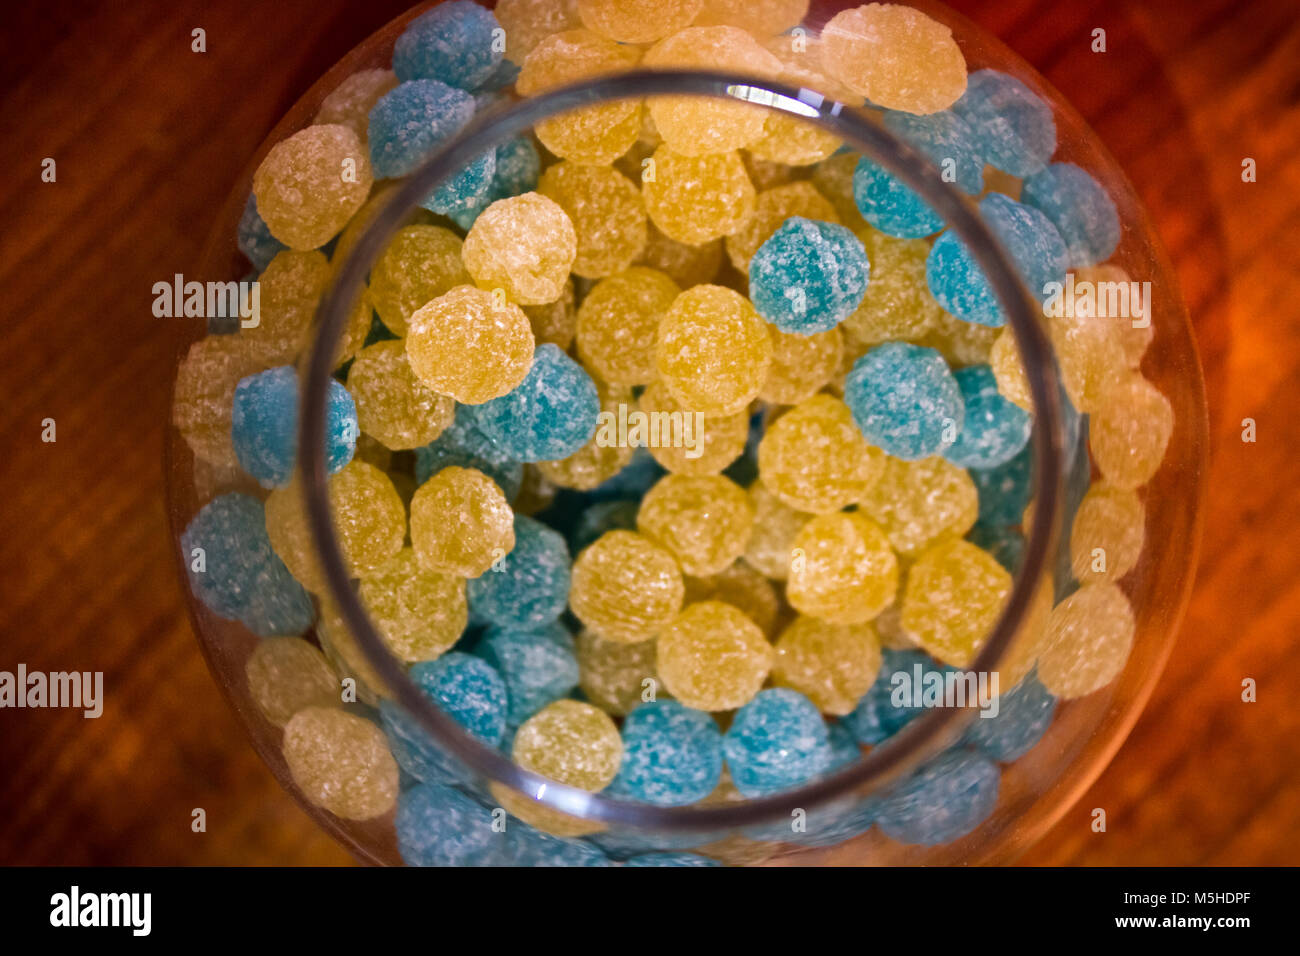 Opened glass jar with round frosty yellow and blue candy on wooden table Stock Photo